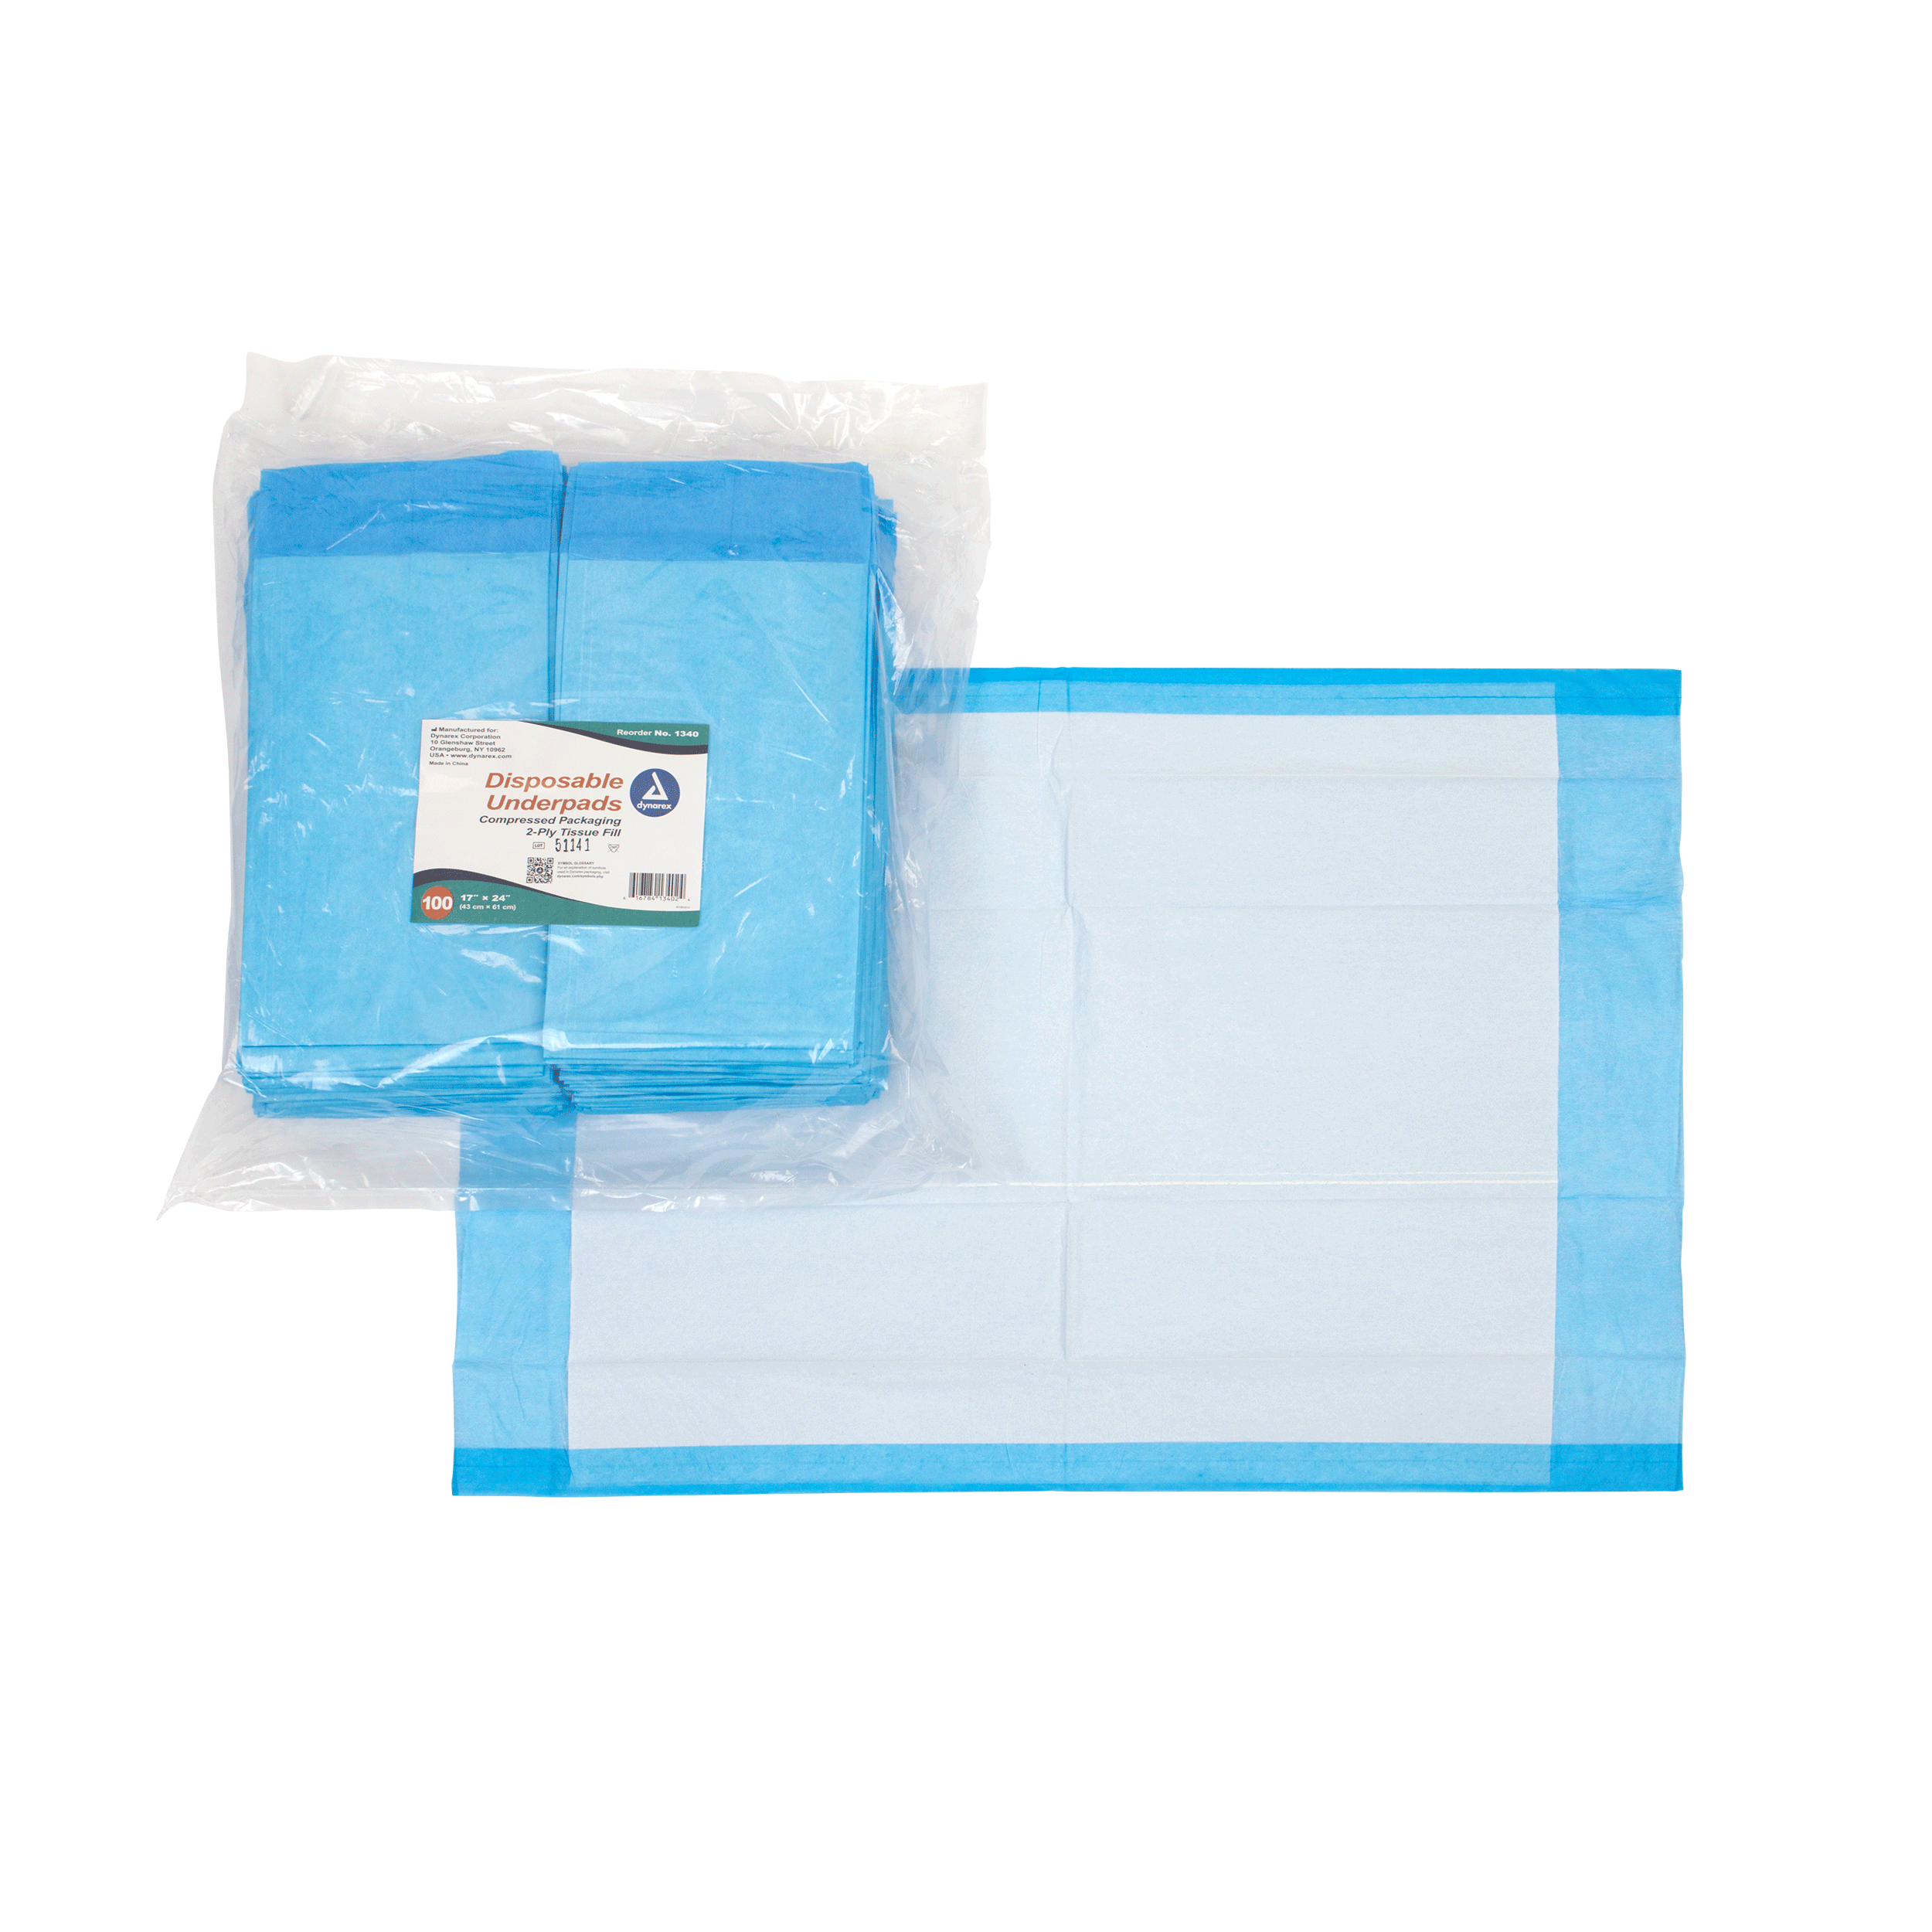 Disposable Underpads, 17 X 24 – Tissue Fill (2 Ply)